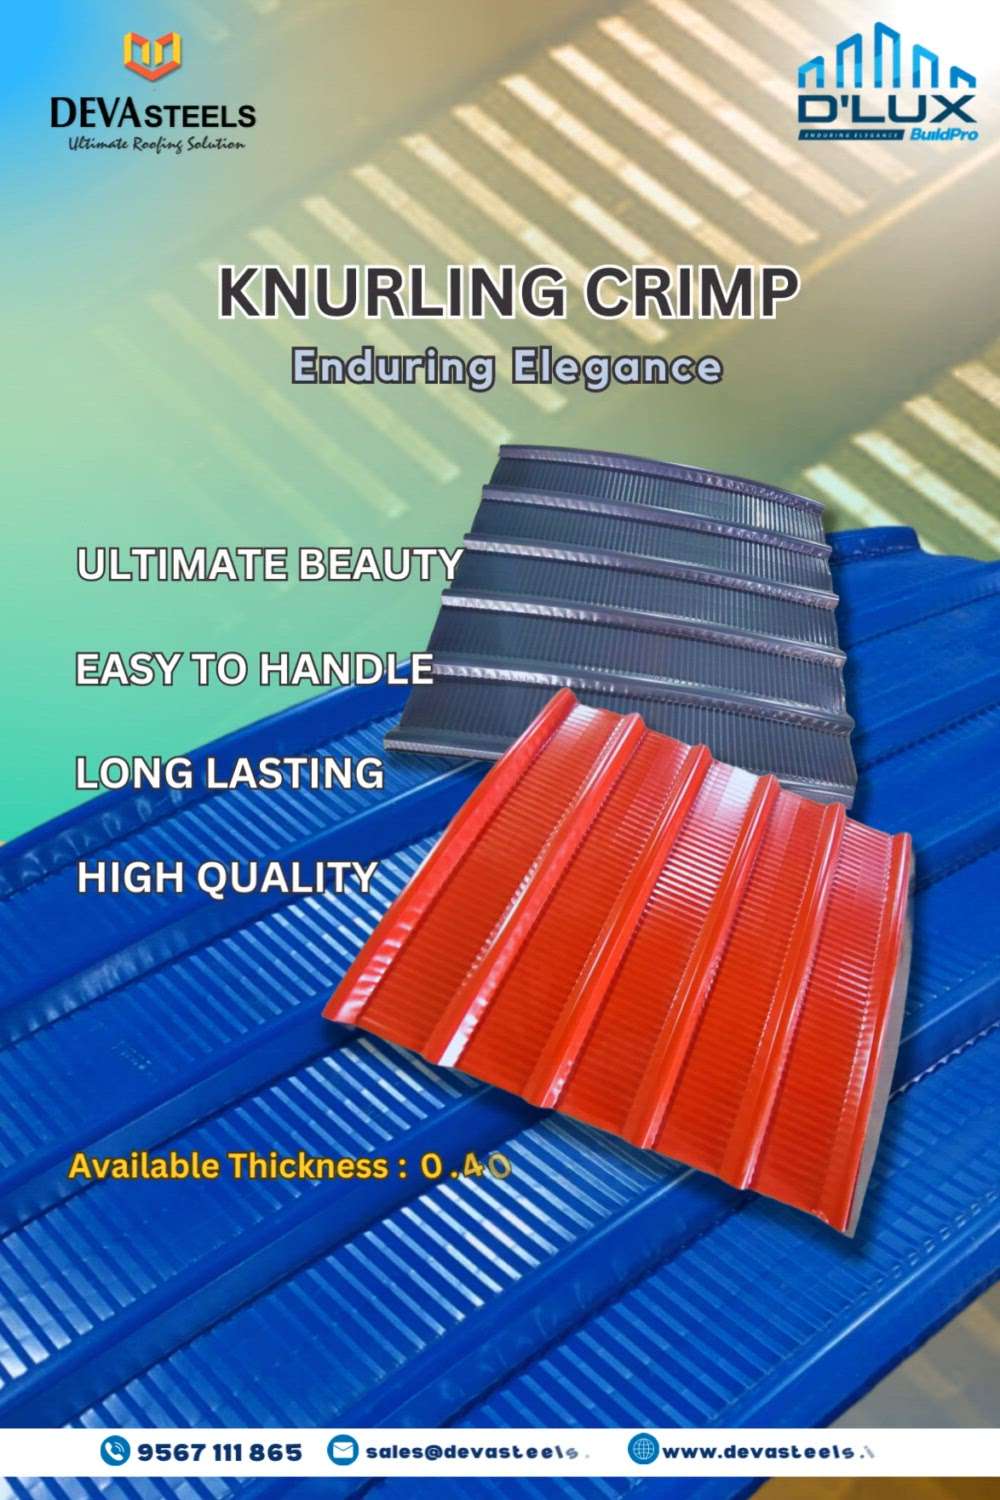 Latest trend in Crimped / Arch sheets - KNURLING Crimp 

Available in many colours and thicknesses

No chance for breakages/pin holes

Easy to handle & transport

#Architect #Archsheets #Bendedsheets #Crimped #Crimpedsheets #JSW #TATA #jindal